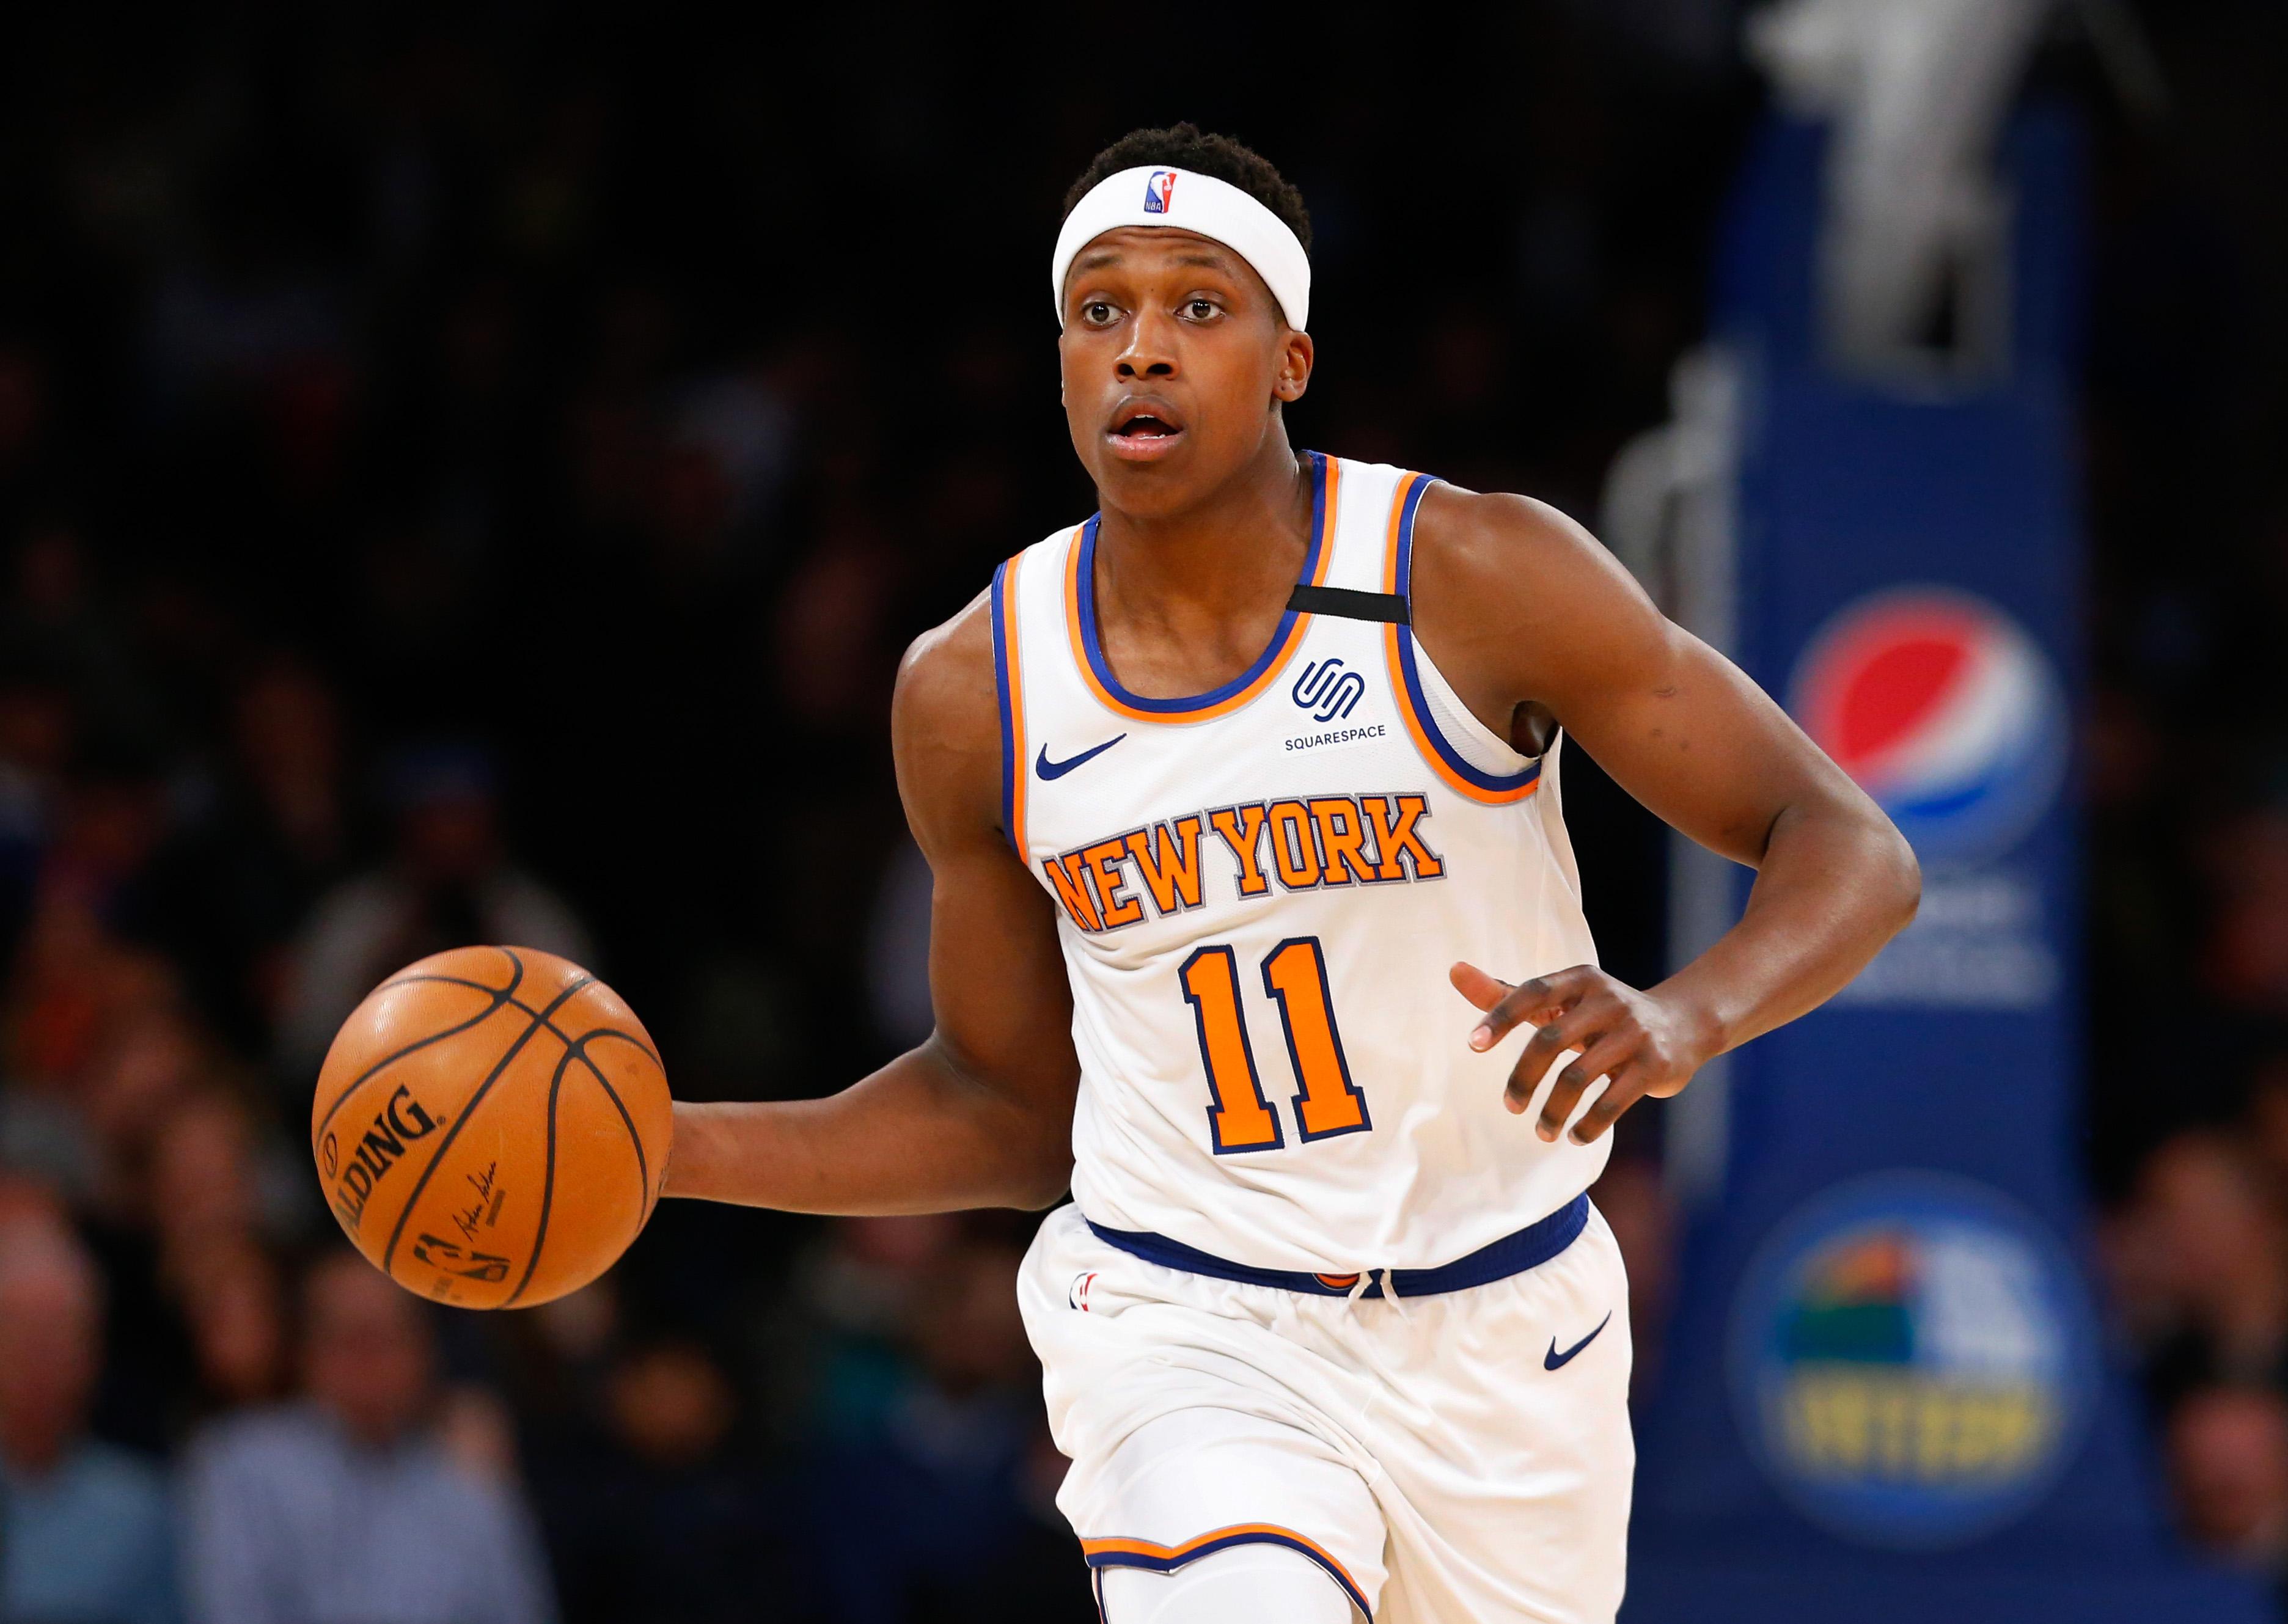 Feb 21, 2020; New York, New York, USA; New York Knicks guard Frank Ntilikina (11) dribbles the ball against the Indiana Pacers during the second half at Madison Square Garden. Mandatory Credit: Noah K. Murray-USA TODAY Sports / © Noah K. Murray-USA TODAY Sports